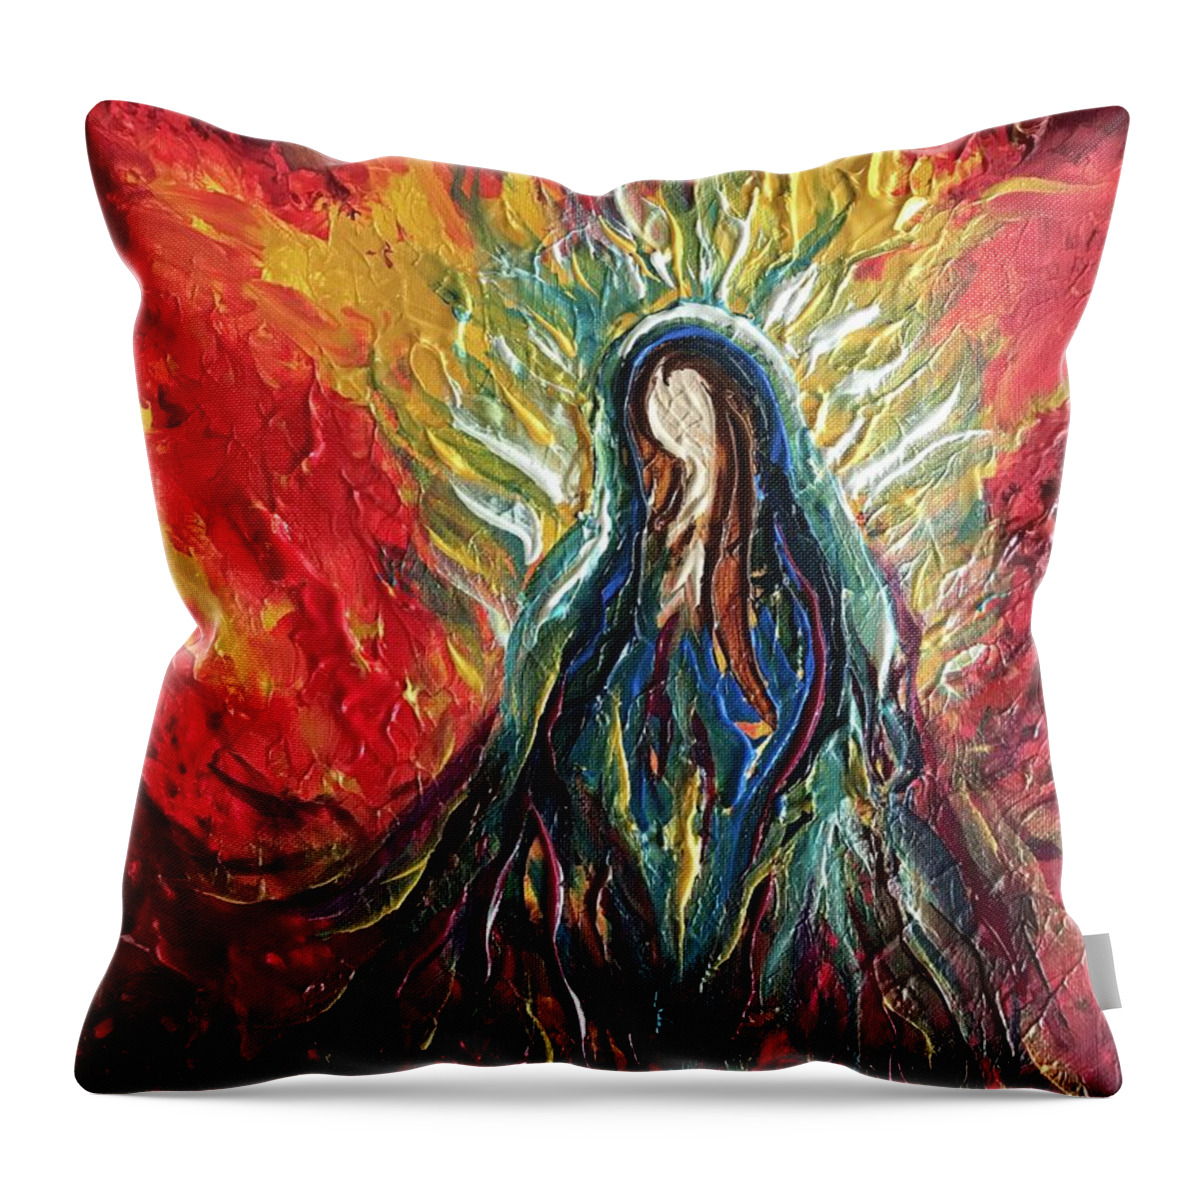 Goddess Throw Pillow featuring the painting Fire Within by Michelle Pier